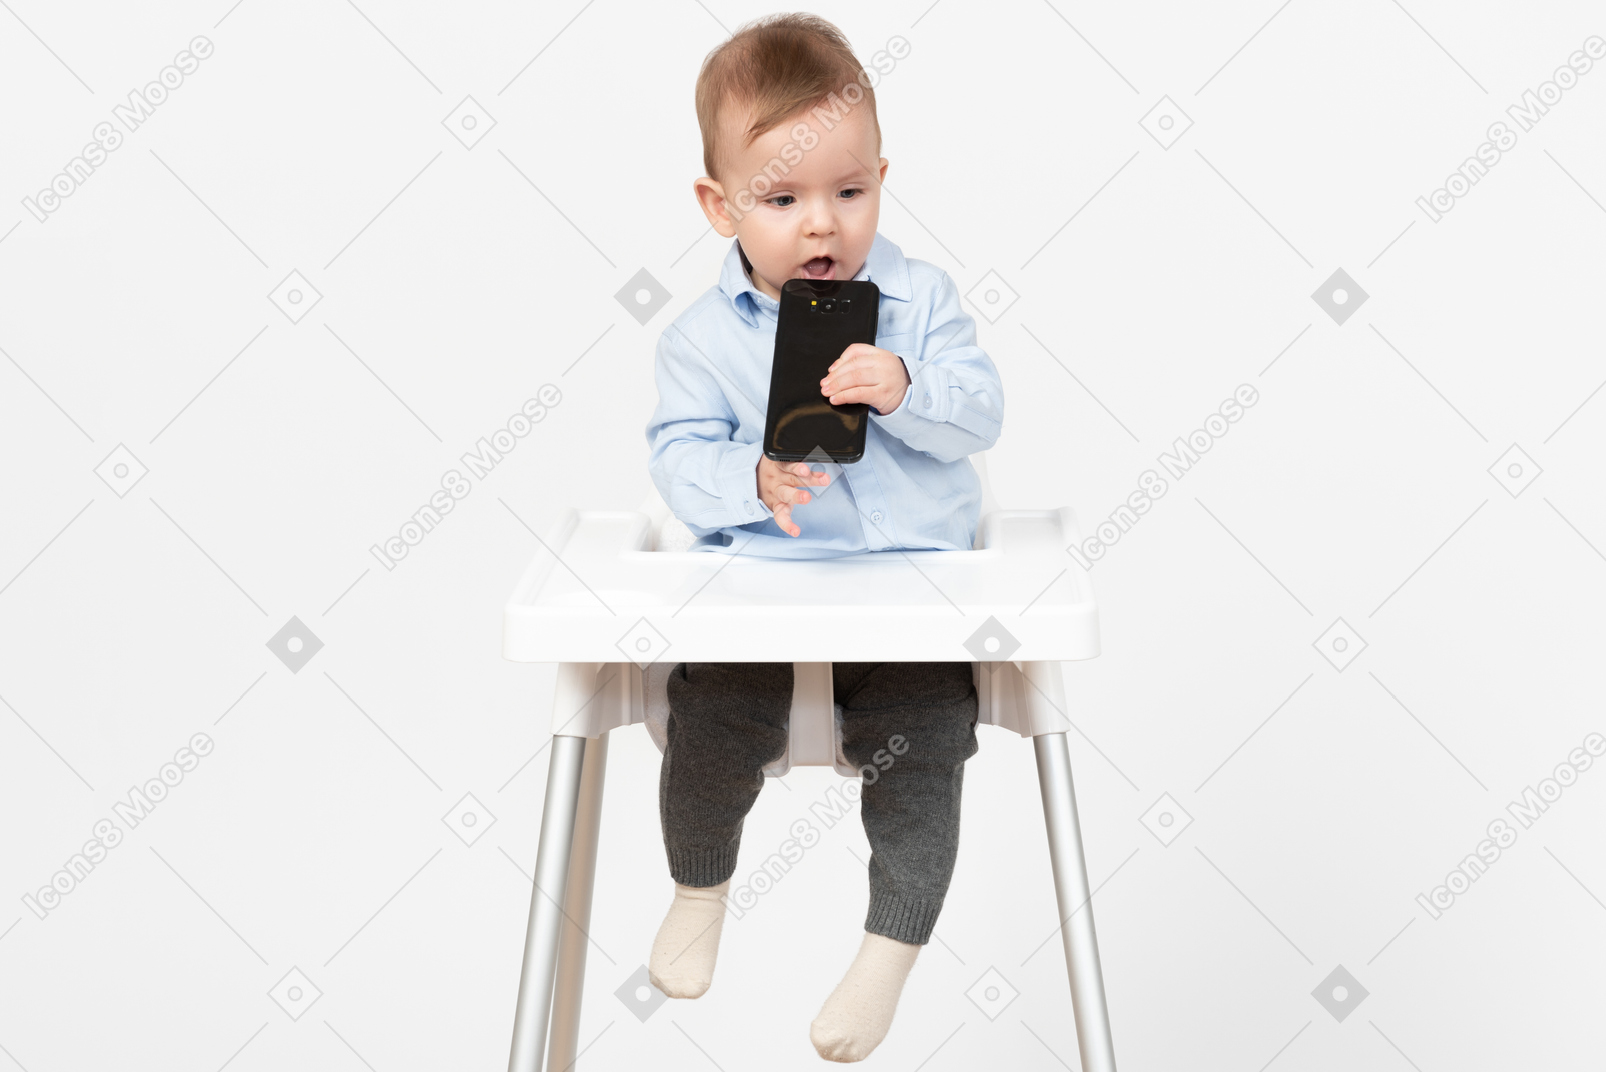 Baby boy sitting in highchair and holding mobile phone